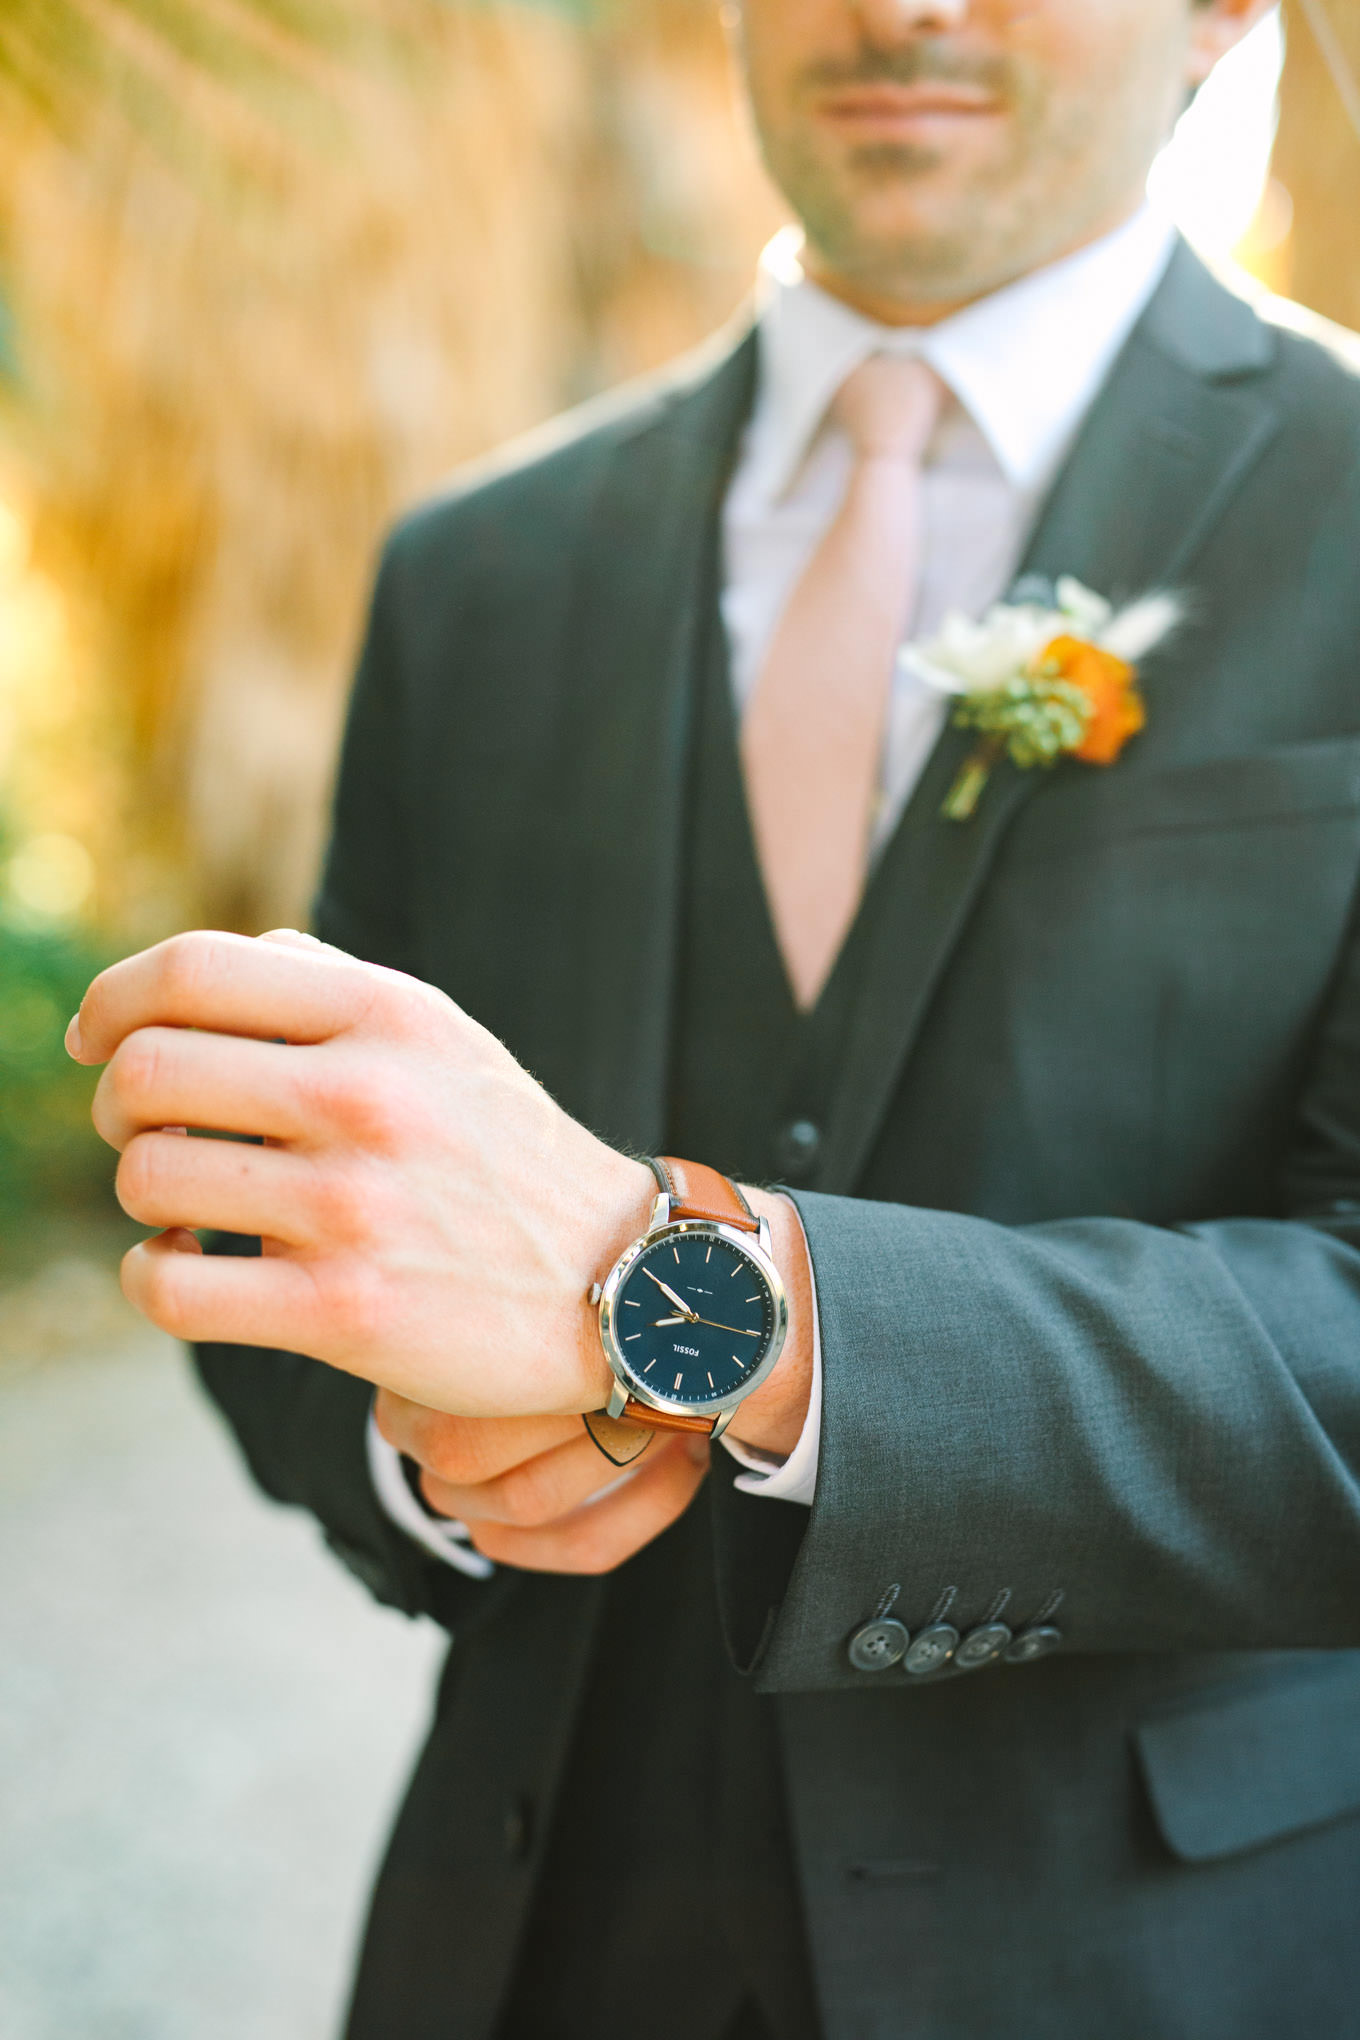 Groom putting on watch | Living Desert Zoo & Gardens wedding with unique details | Elevated and colorful wedding photography for fun-loving couples in Southern California |  #PalmSprings #palmspringsphotographer #gardenwedding #palmspringswedding  Source: Mary Costa Photography | Los Angeles wedding photographer 